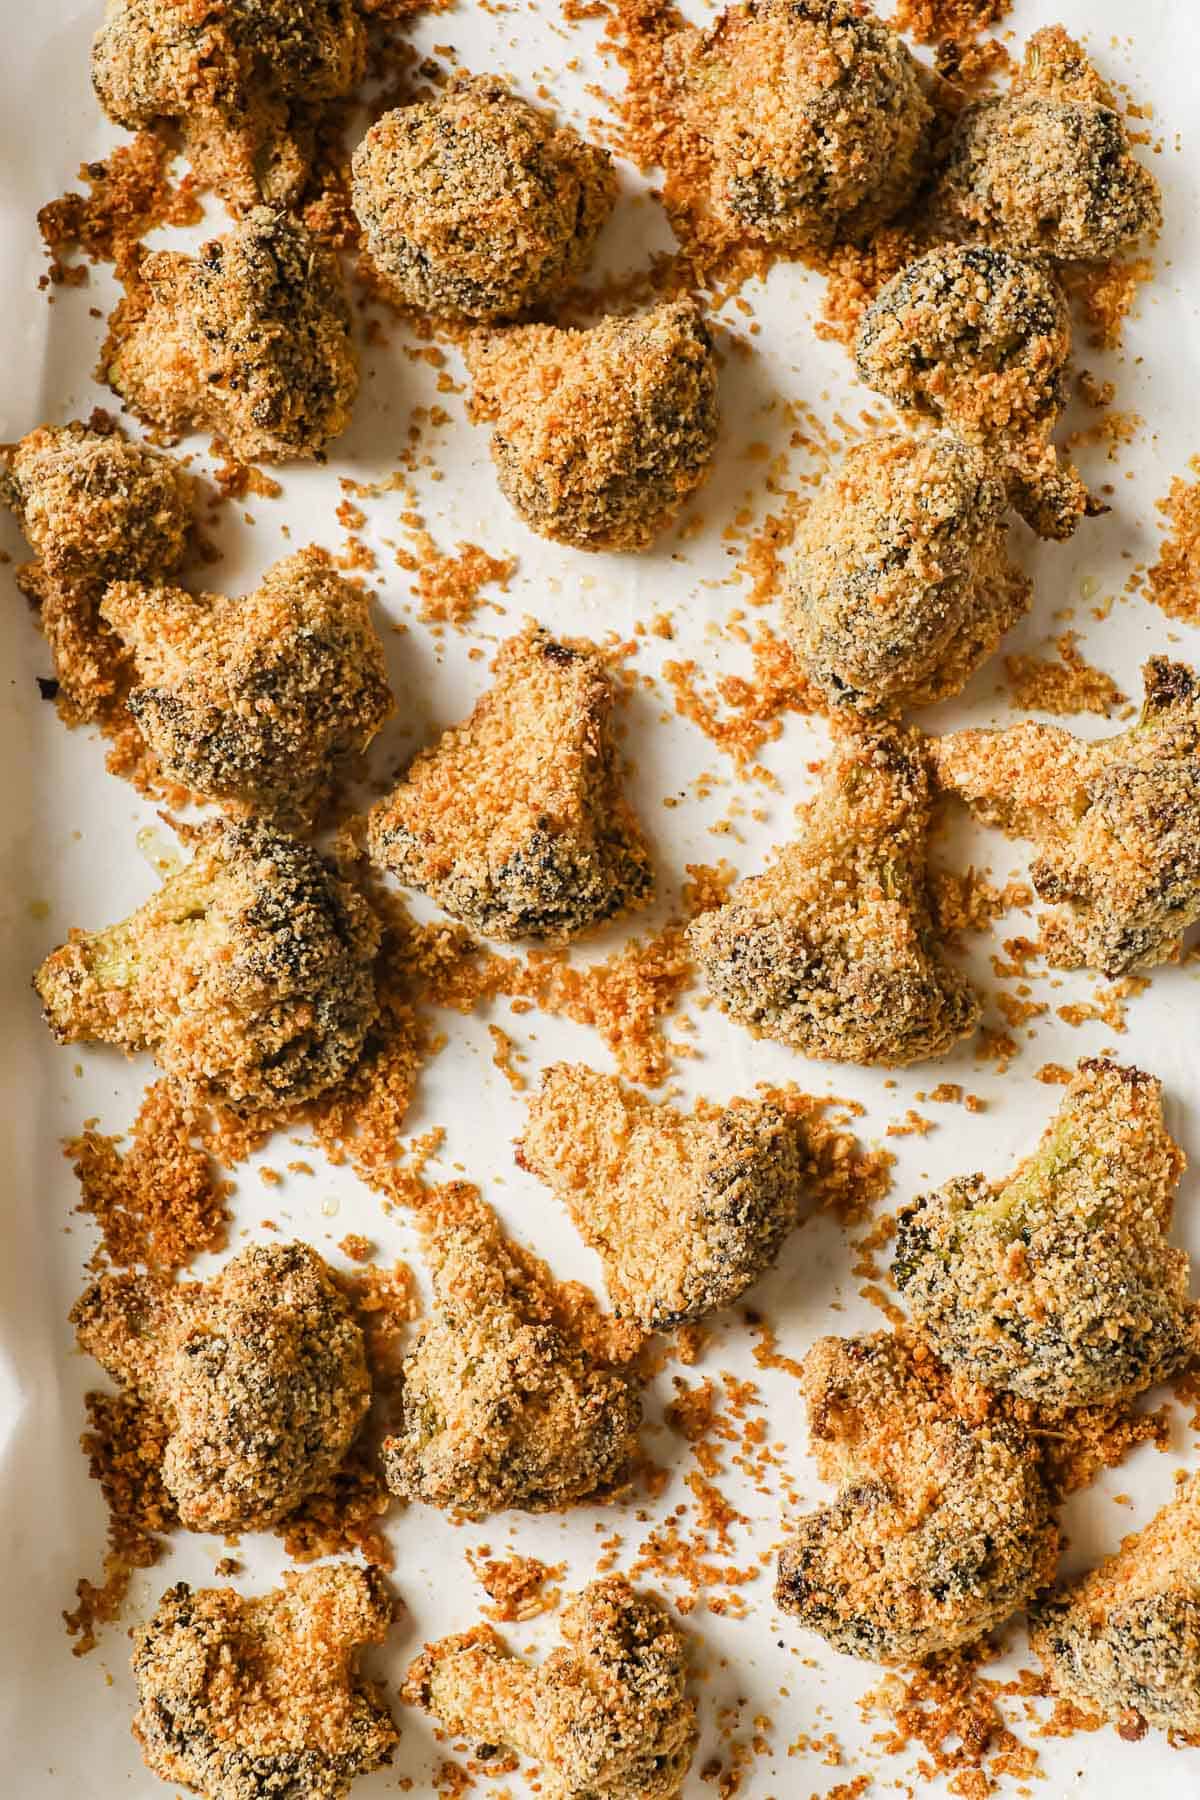 broccoli florets that have been coated in mayo and then rolled in a low carb breading and placed on a parchment lined sheet pan.